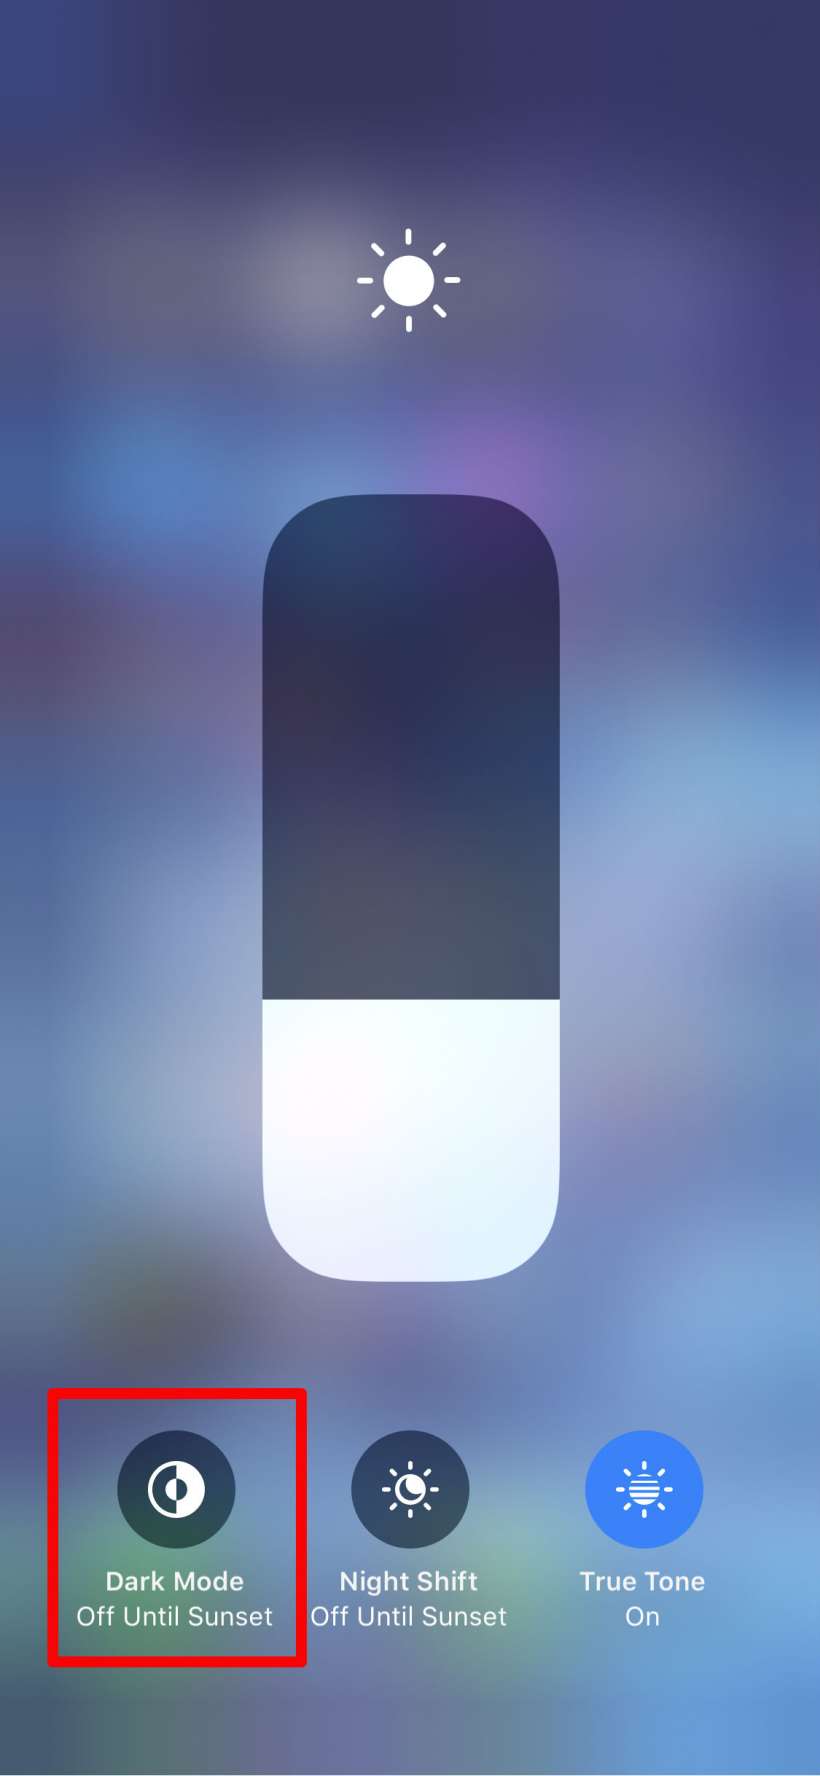 How to add a dark mode button to the Control Center on iPhone and iPad.